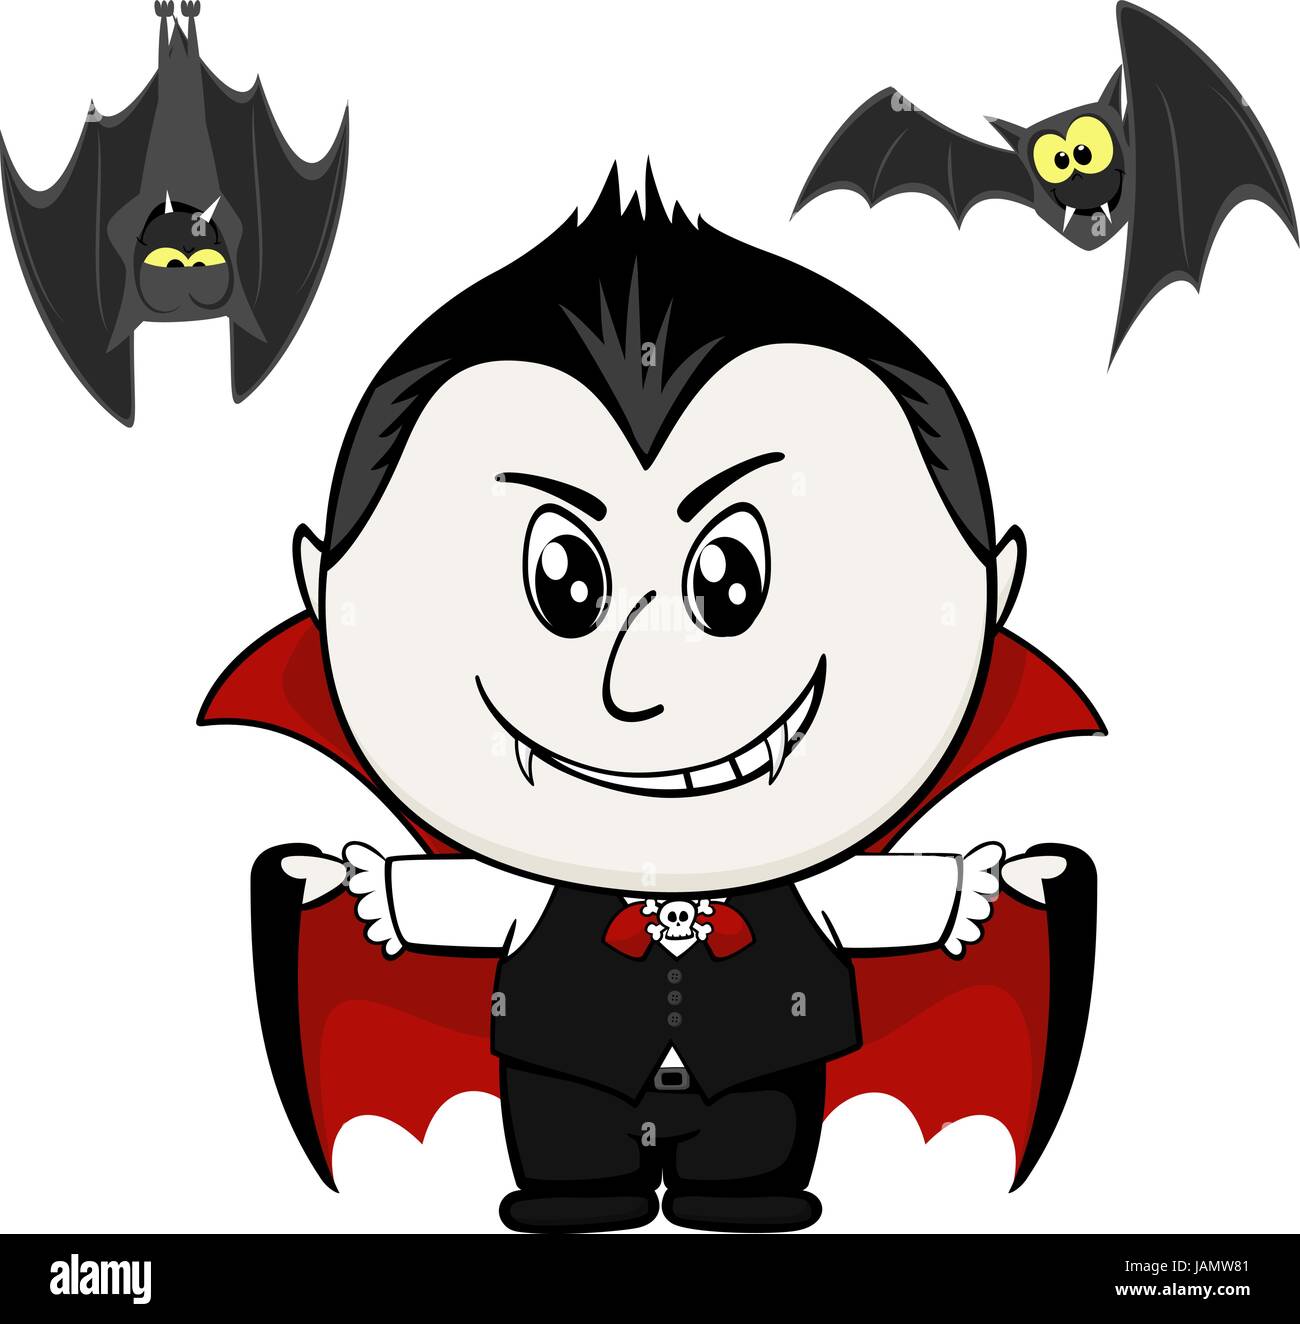 Vampire character Stock Vector Images - Alamy